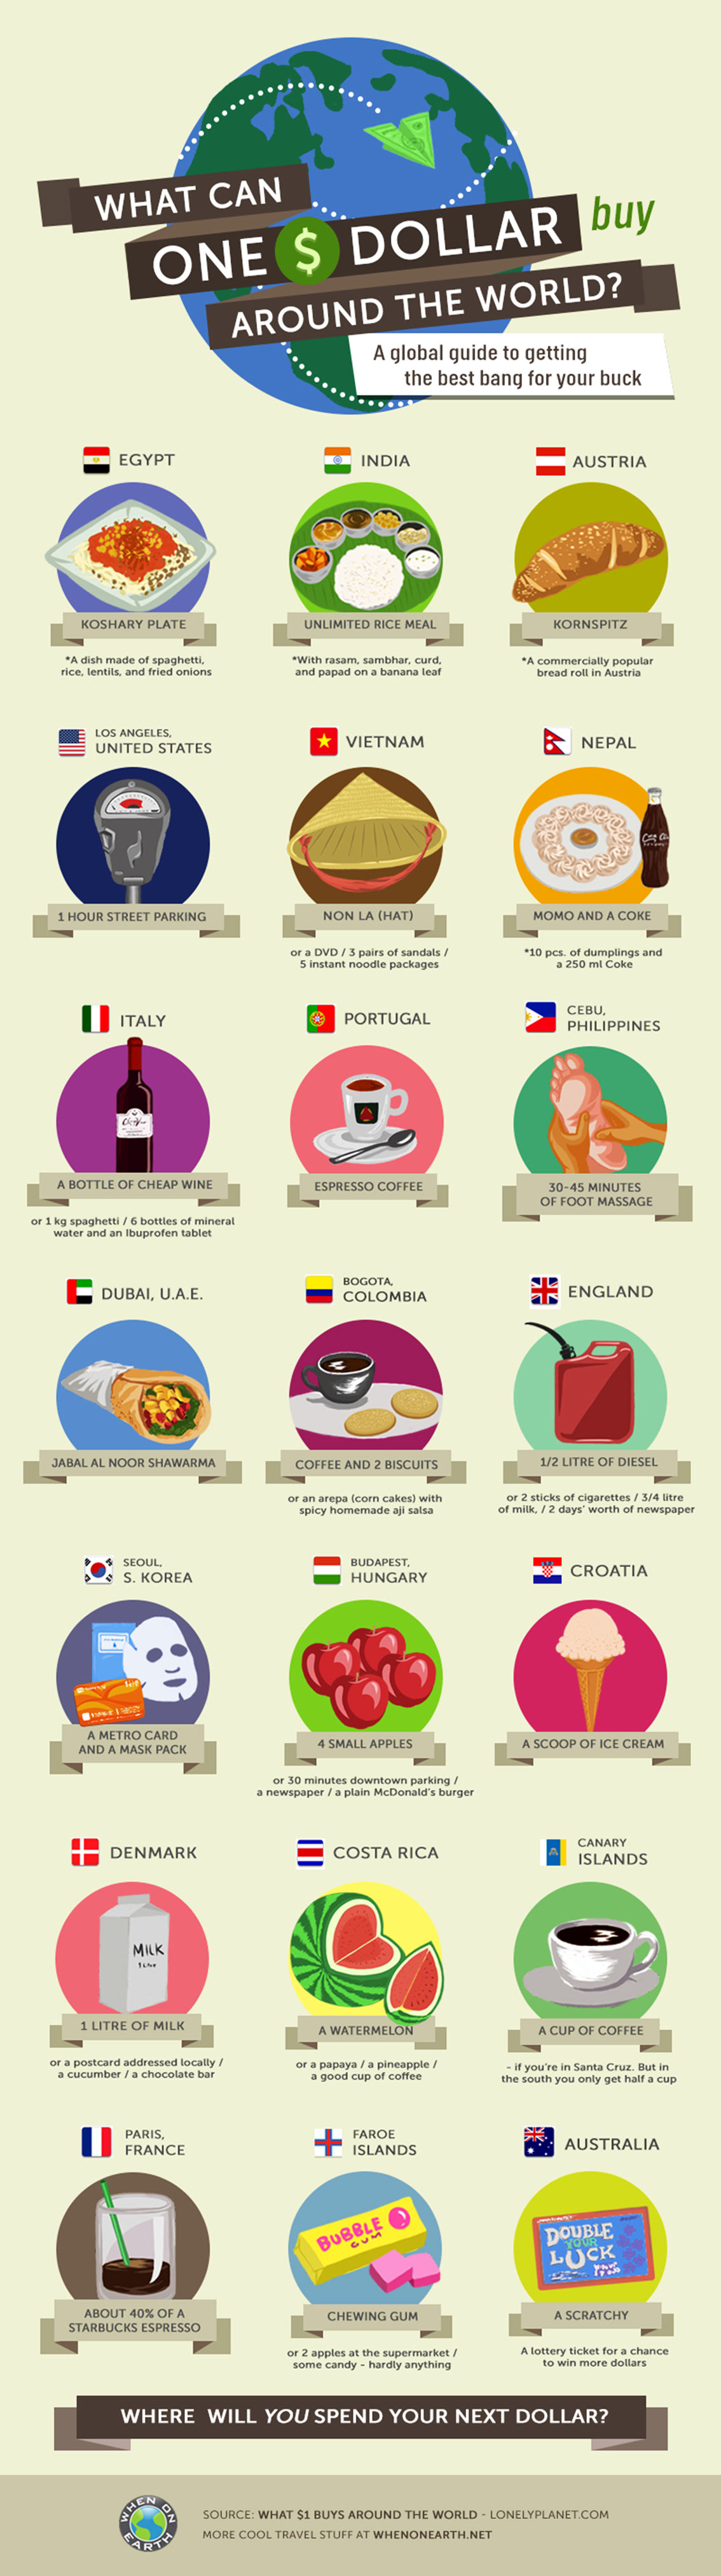 What Can You Buy for a Dollar Around the World - Travel Infographic